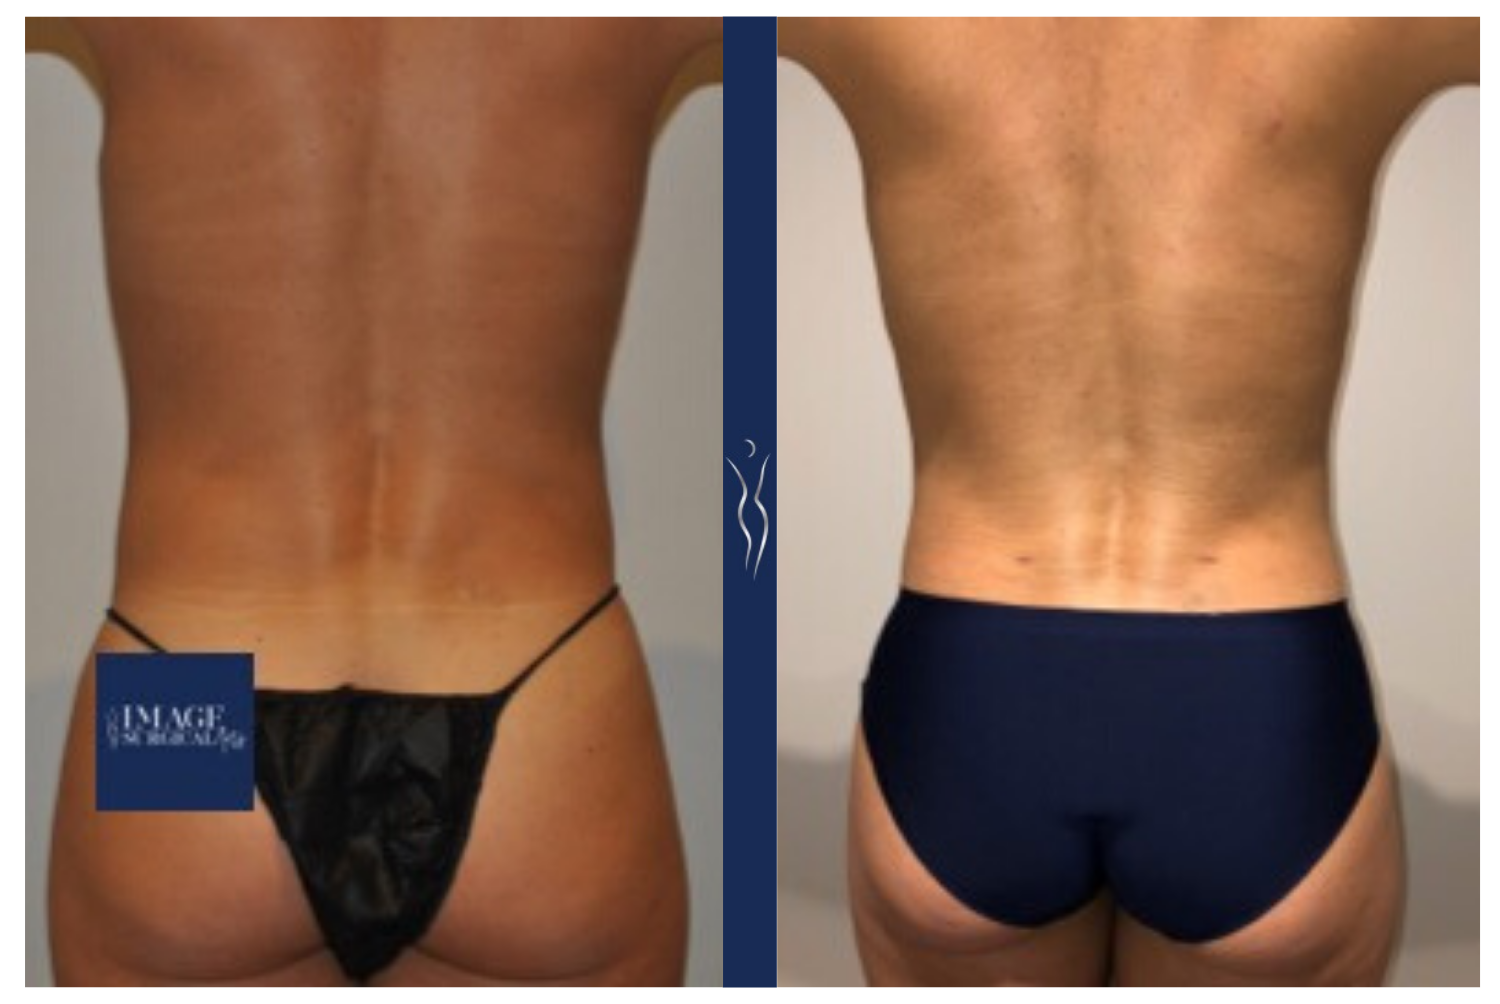 45 year old caucasian lady VASER liposuction and Renuvion back